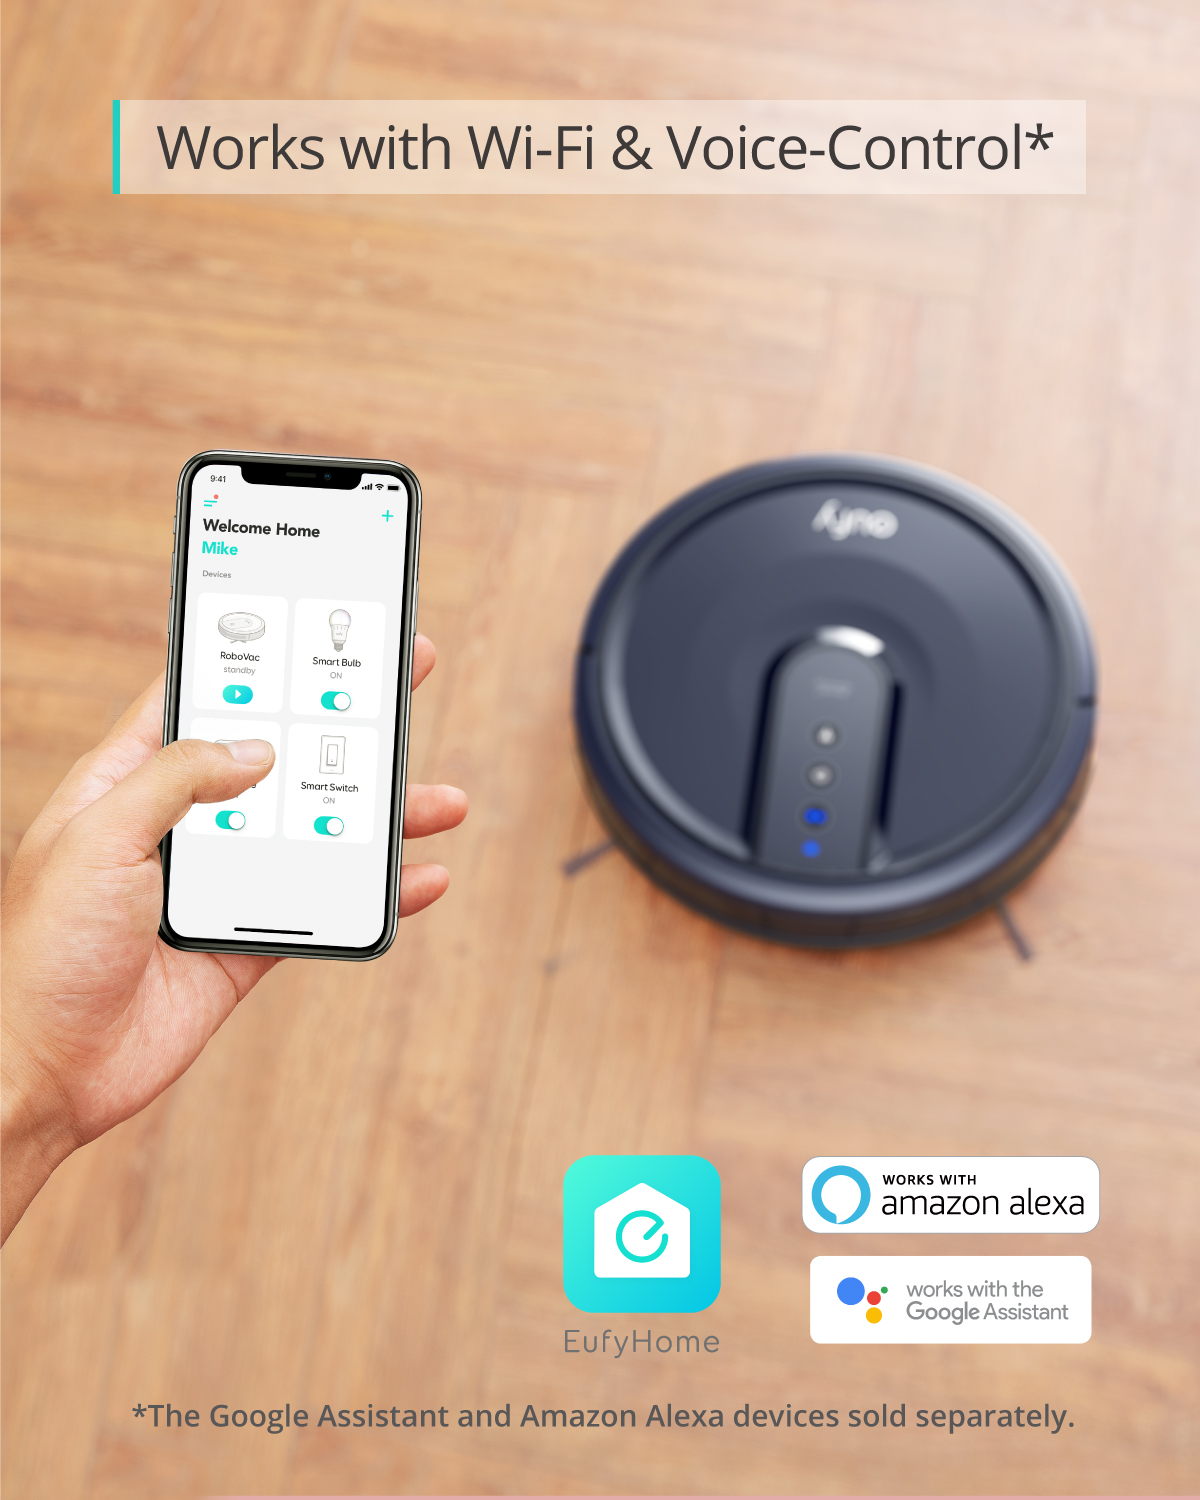 Anker eufy 25C Wi-Fi Connected Robot Vacuum, Great for Picking up Pet Hairs, Quiet, Slim - image 5 of 10